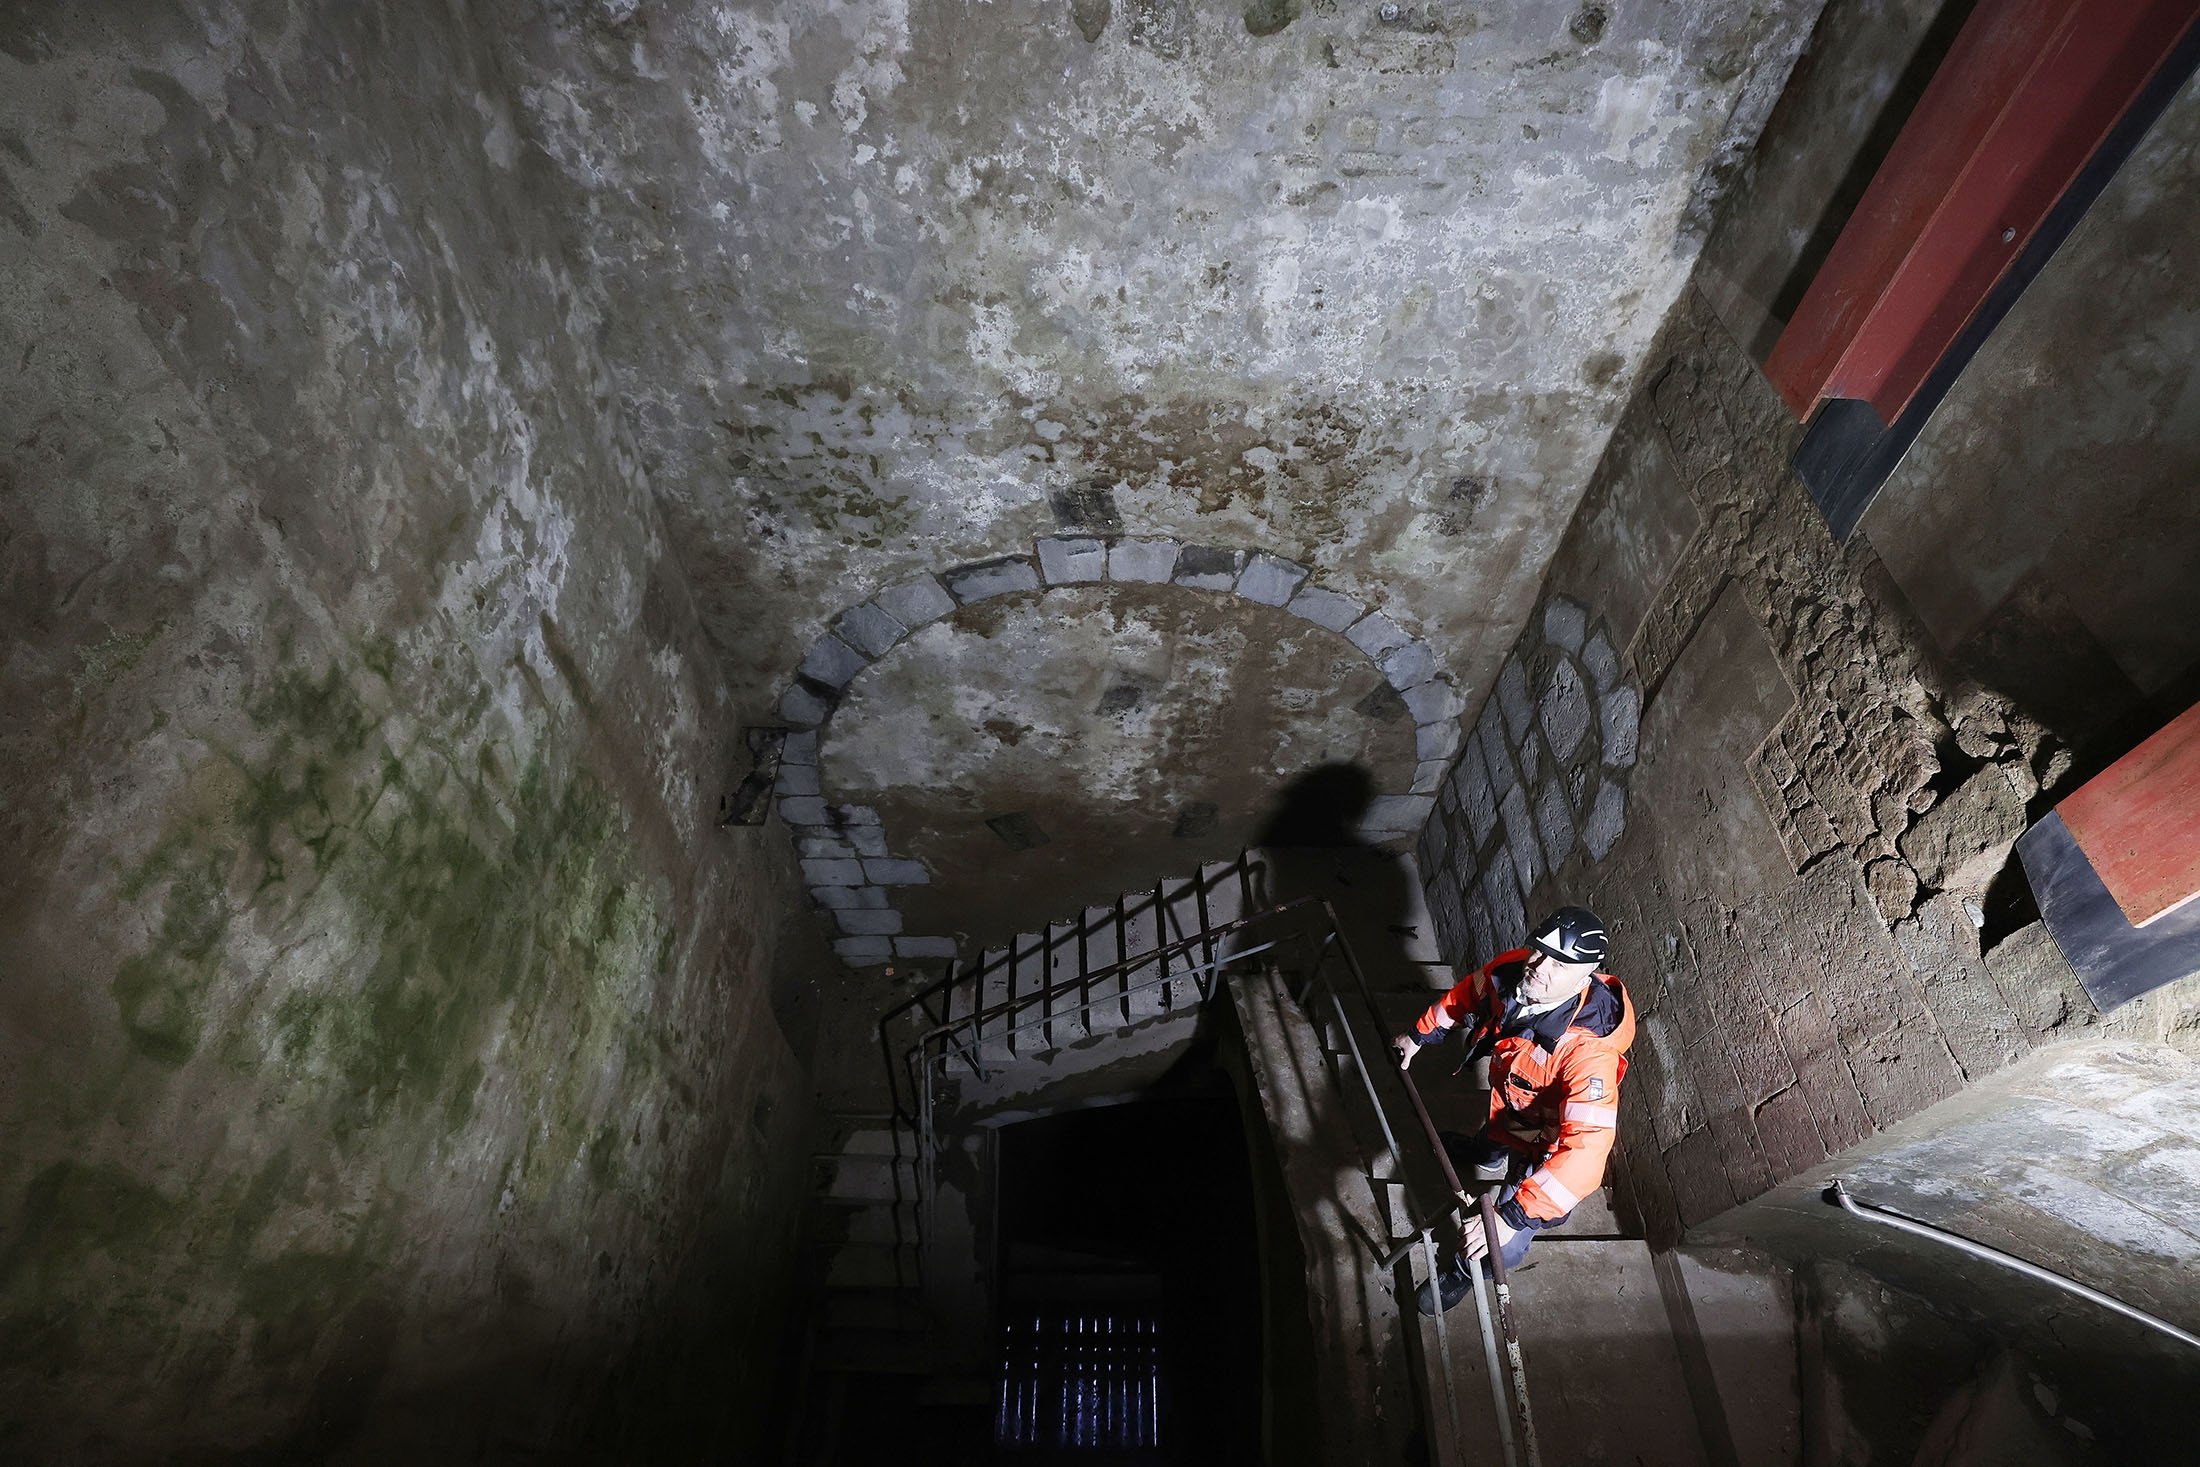 The ceremonial bath area of the medieval Jewish community is among the sites in a planned subterranean Jewish Museum, in Cologne, Germany. (dpa Photo)